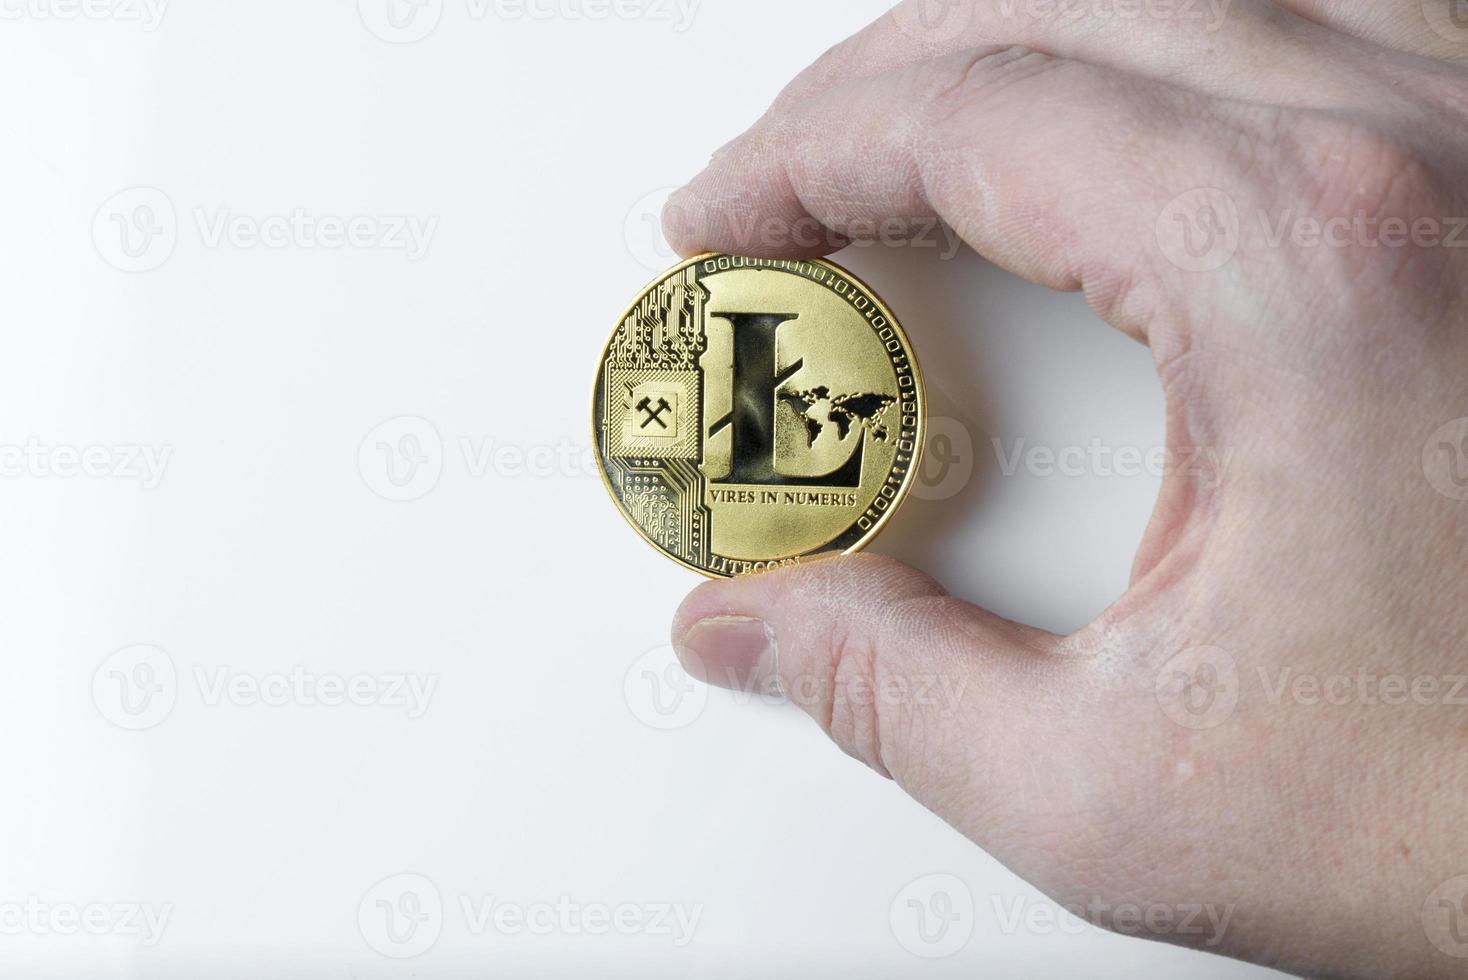 Hand holds one Litecoin on a white background. photo